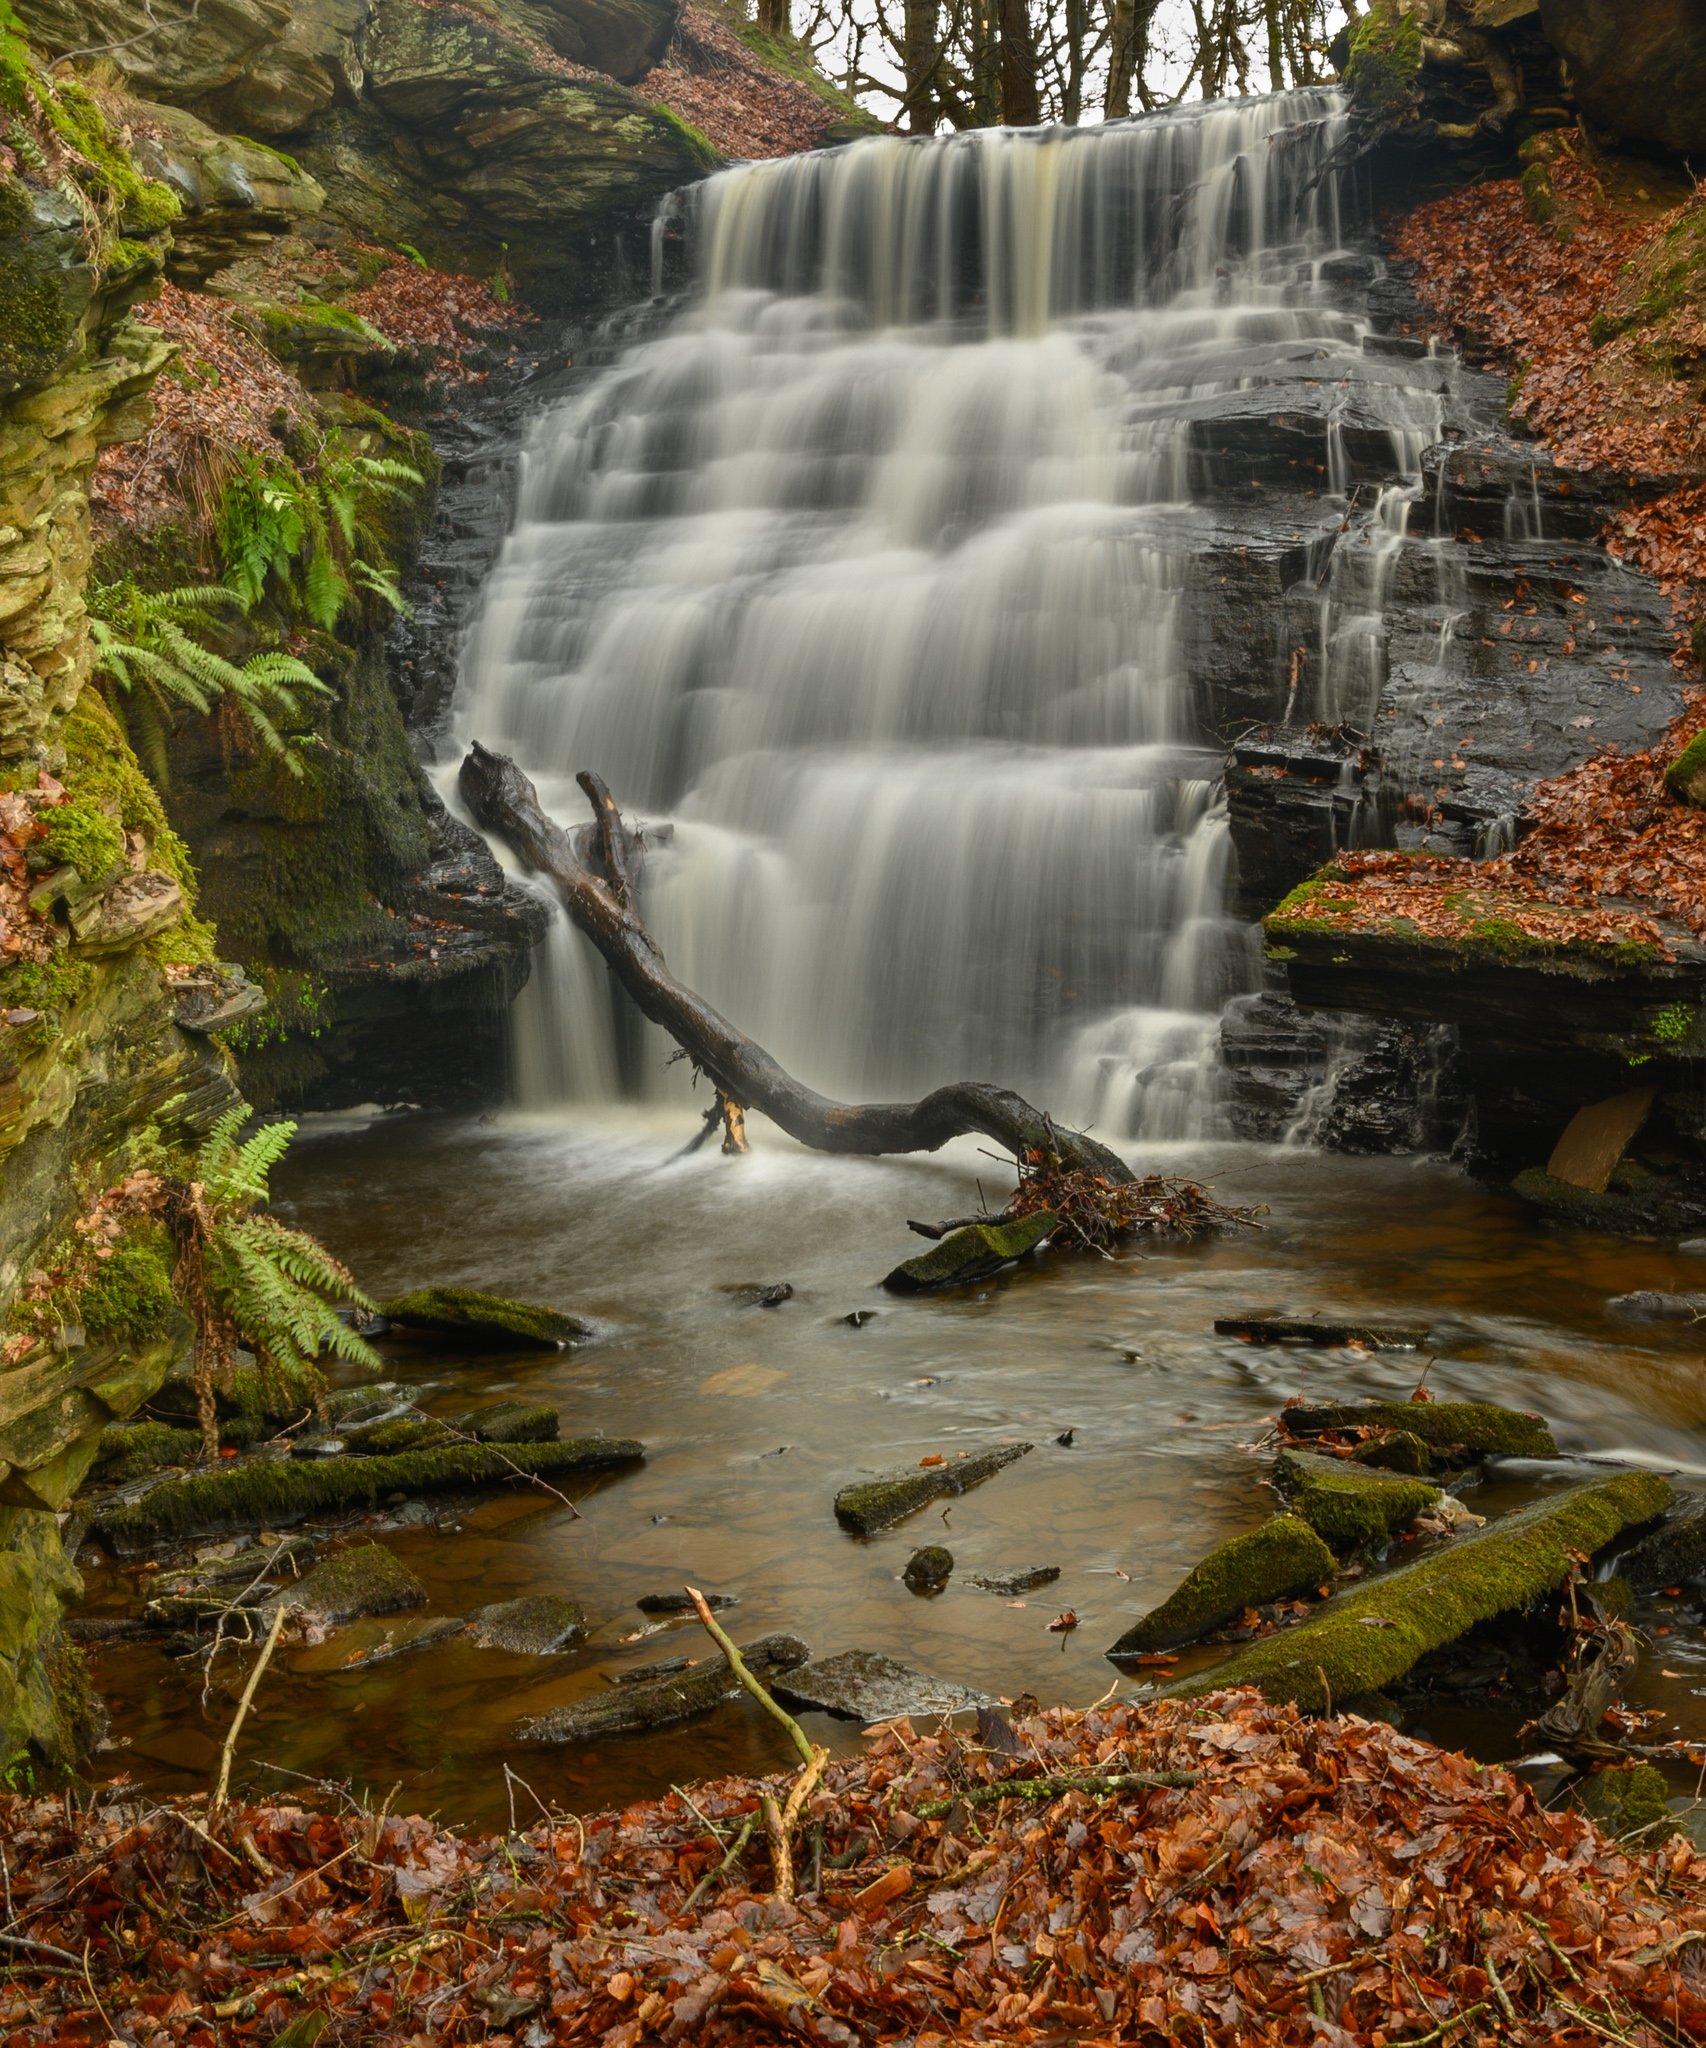 Jerry-Force-waterfall-photography (6 of 7).jpg